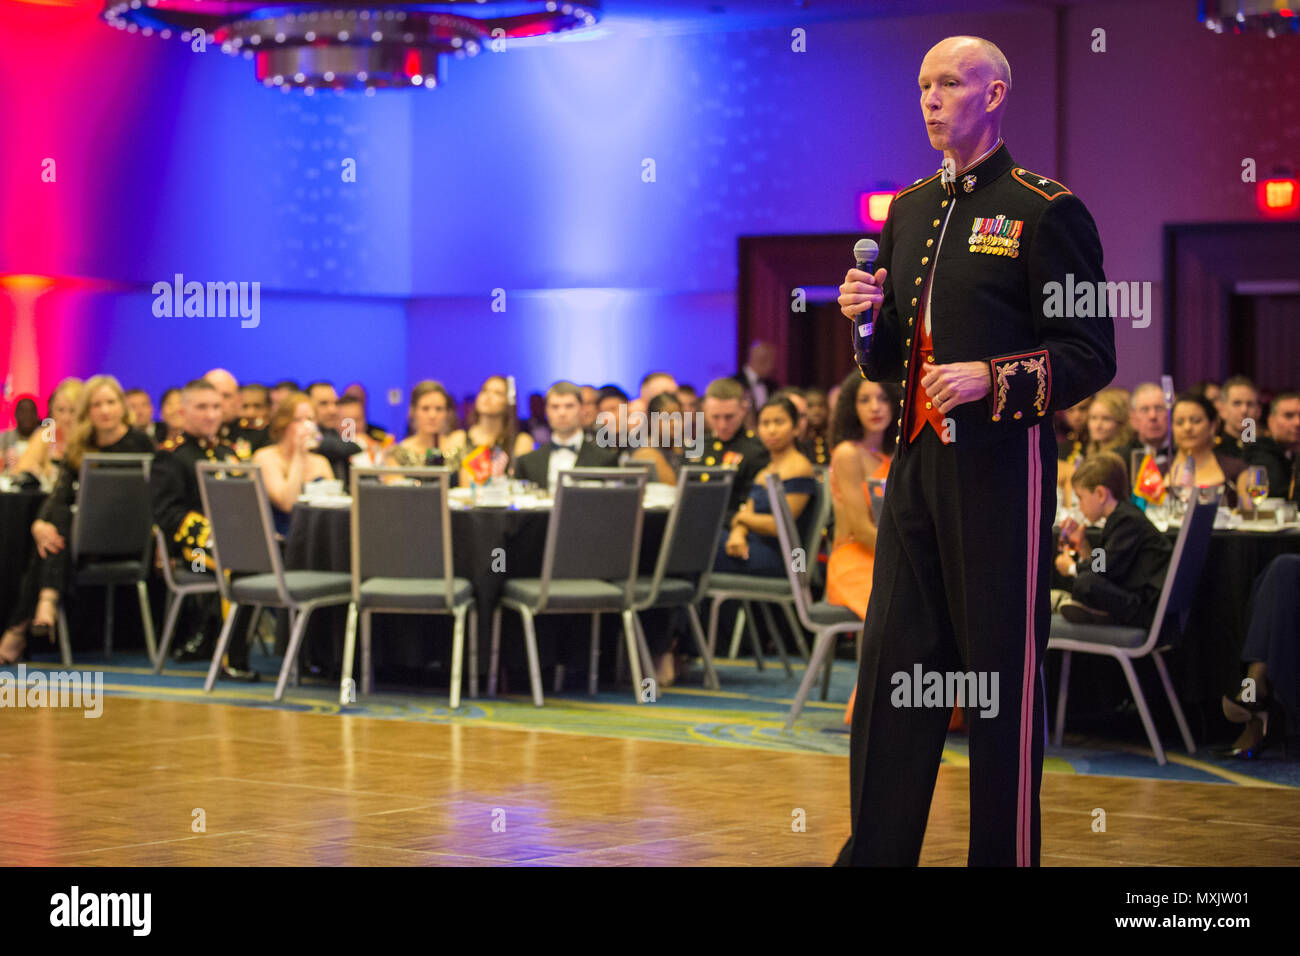 U.S. Marine Corps Brig. Gen. James F. Glynn, director, Office of United State Marine Corps Communication, gives remarks during the Headquarters & Service Battalion Marine Corps Ball at the Renaissance Arlington Capitol View Hotel, Arlington, Va., Nov. 05, 2016. The ball was held in celebration of the Marine Corps’ 241st birthday. (U.S. Marine Corps photo by Pfc. Alex A. Quiles) Stock Photo